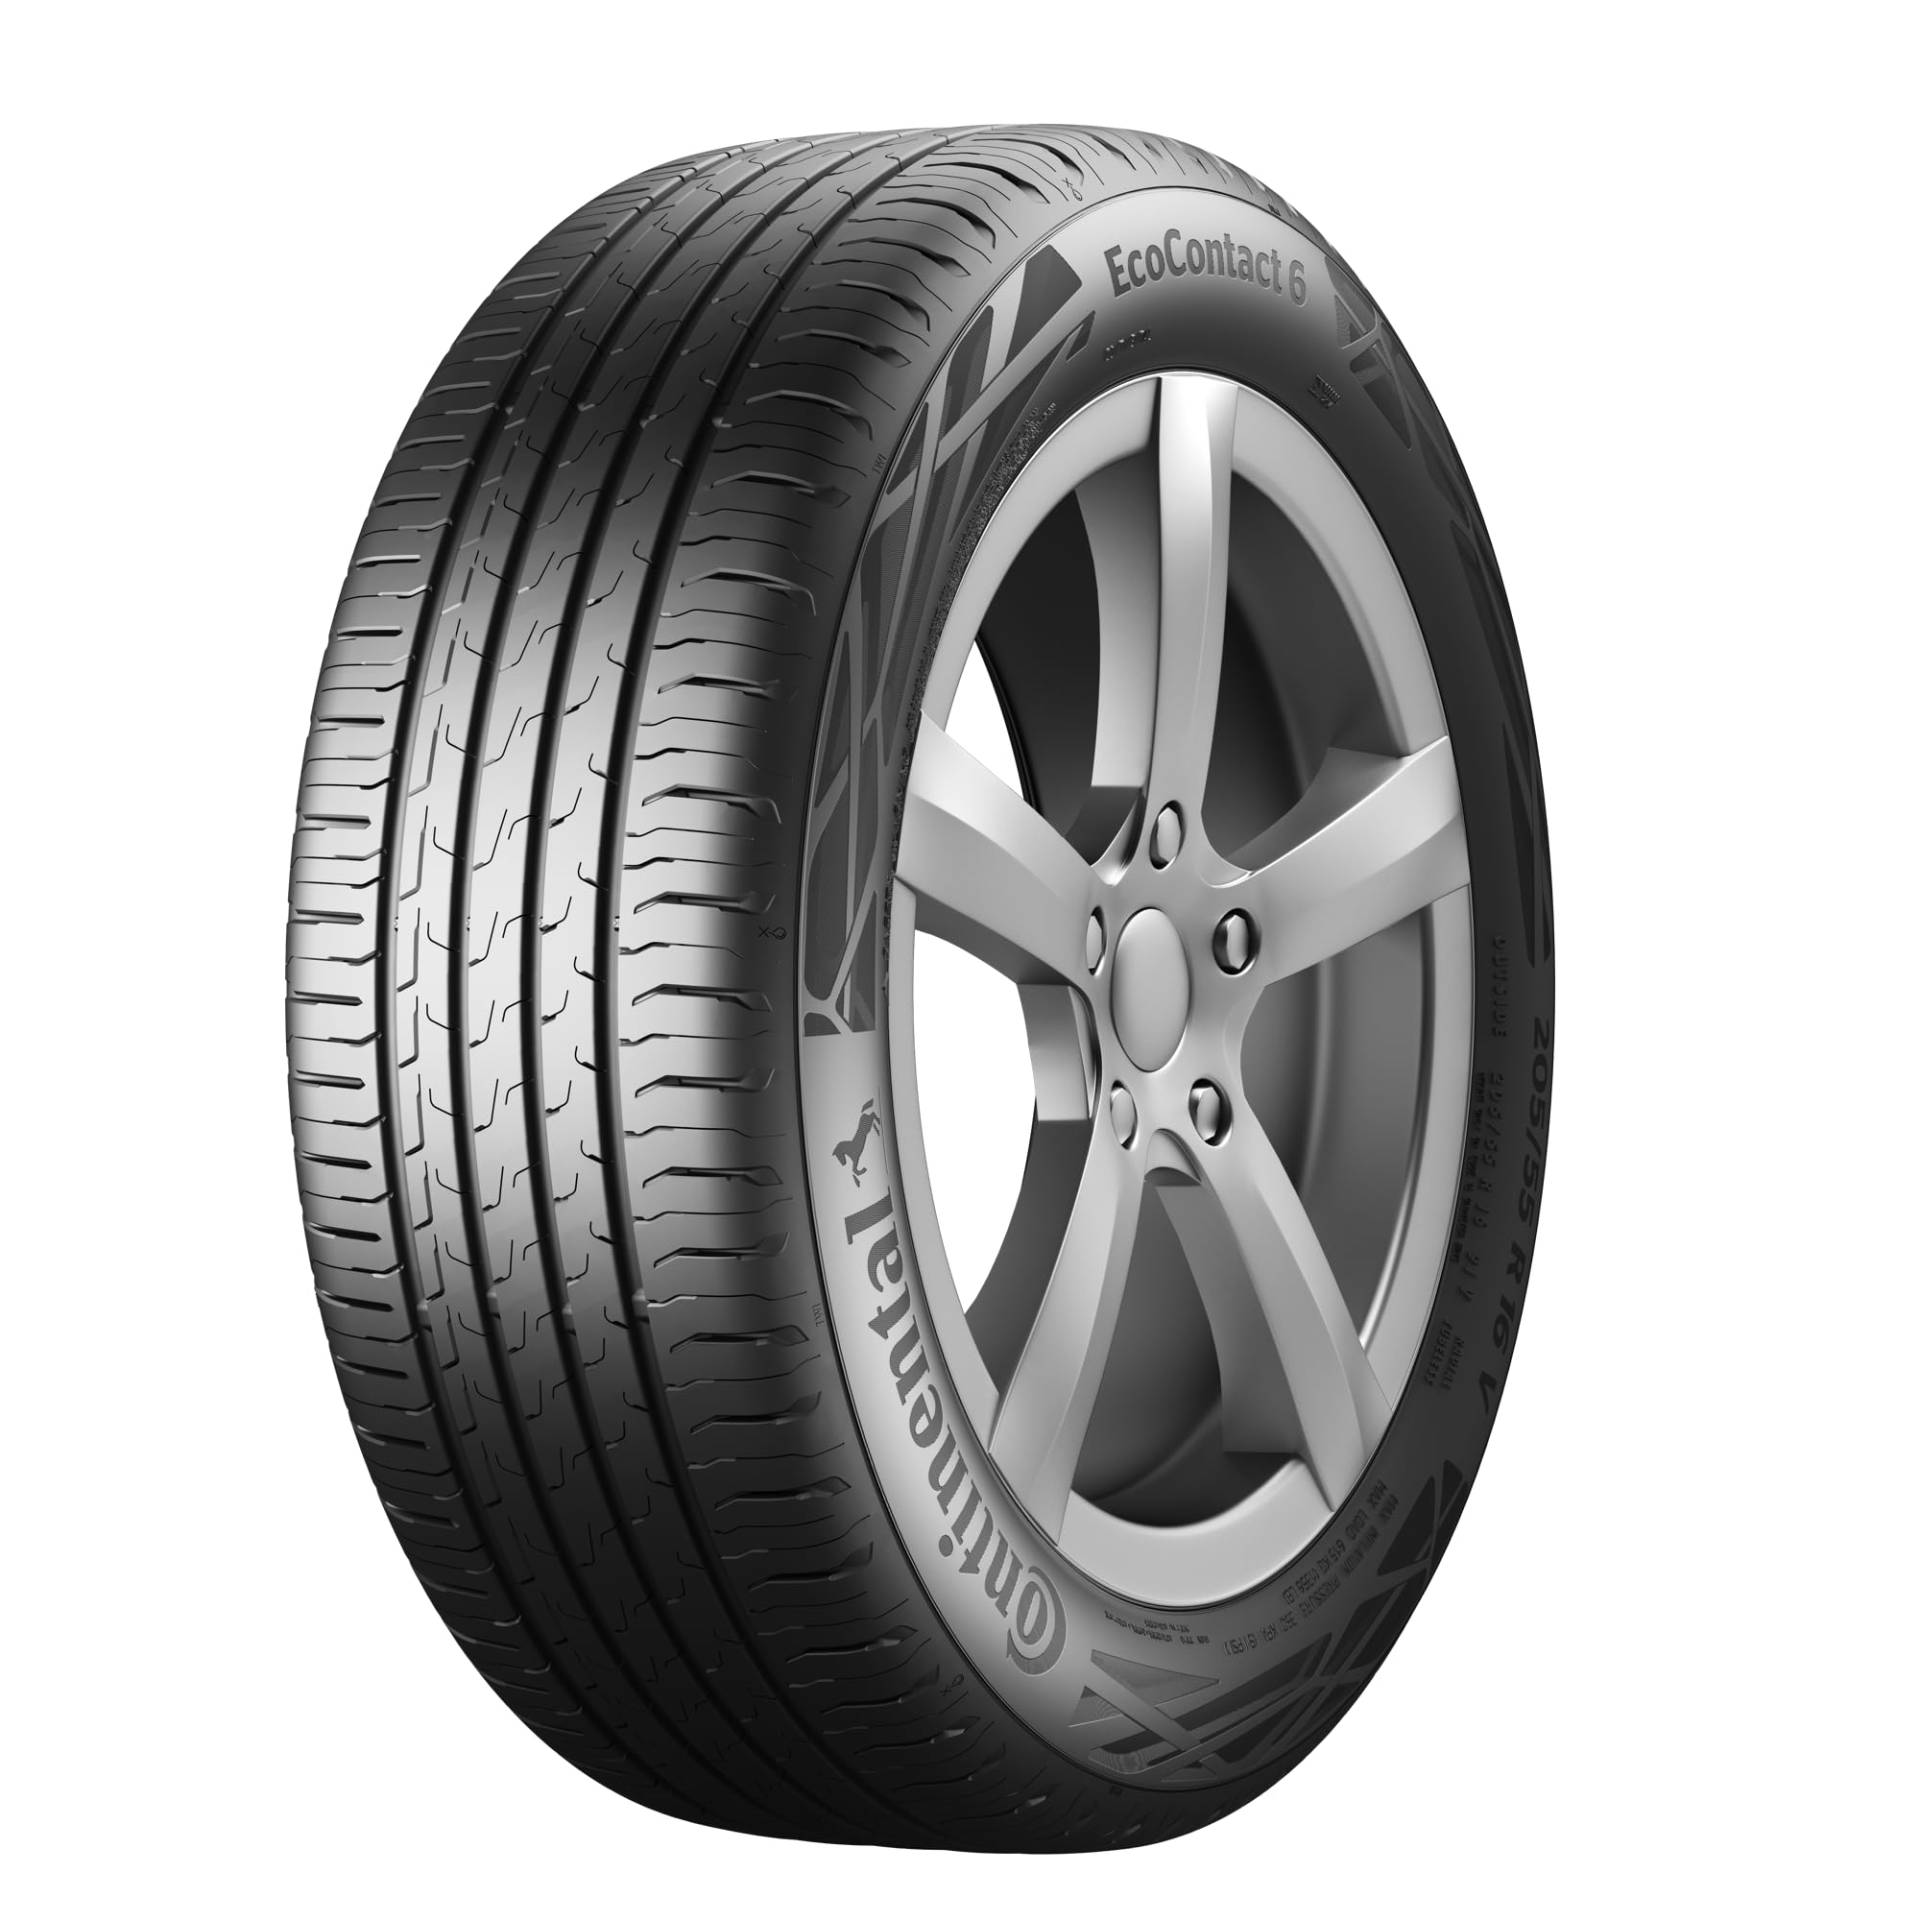 CONTINENTAL - EcoContact 6 - 235/55 R 18 - 100V/A/A/71dB - Sommerreifen von Continental